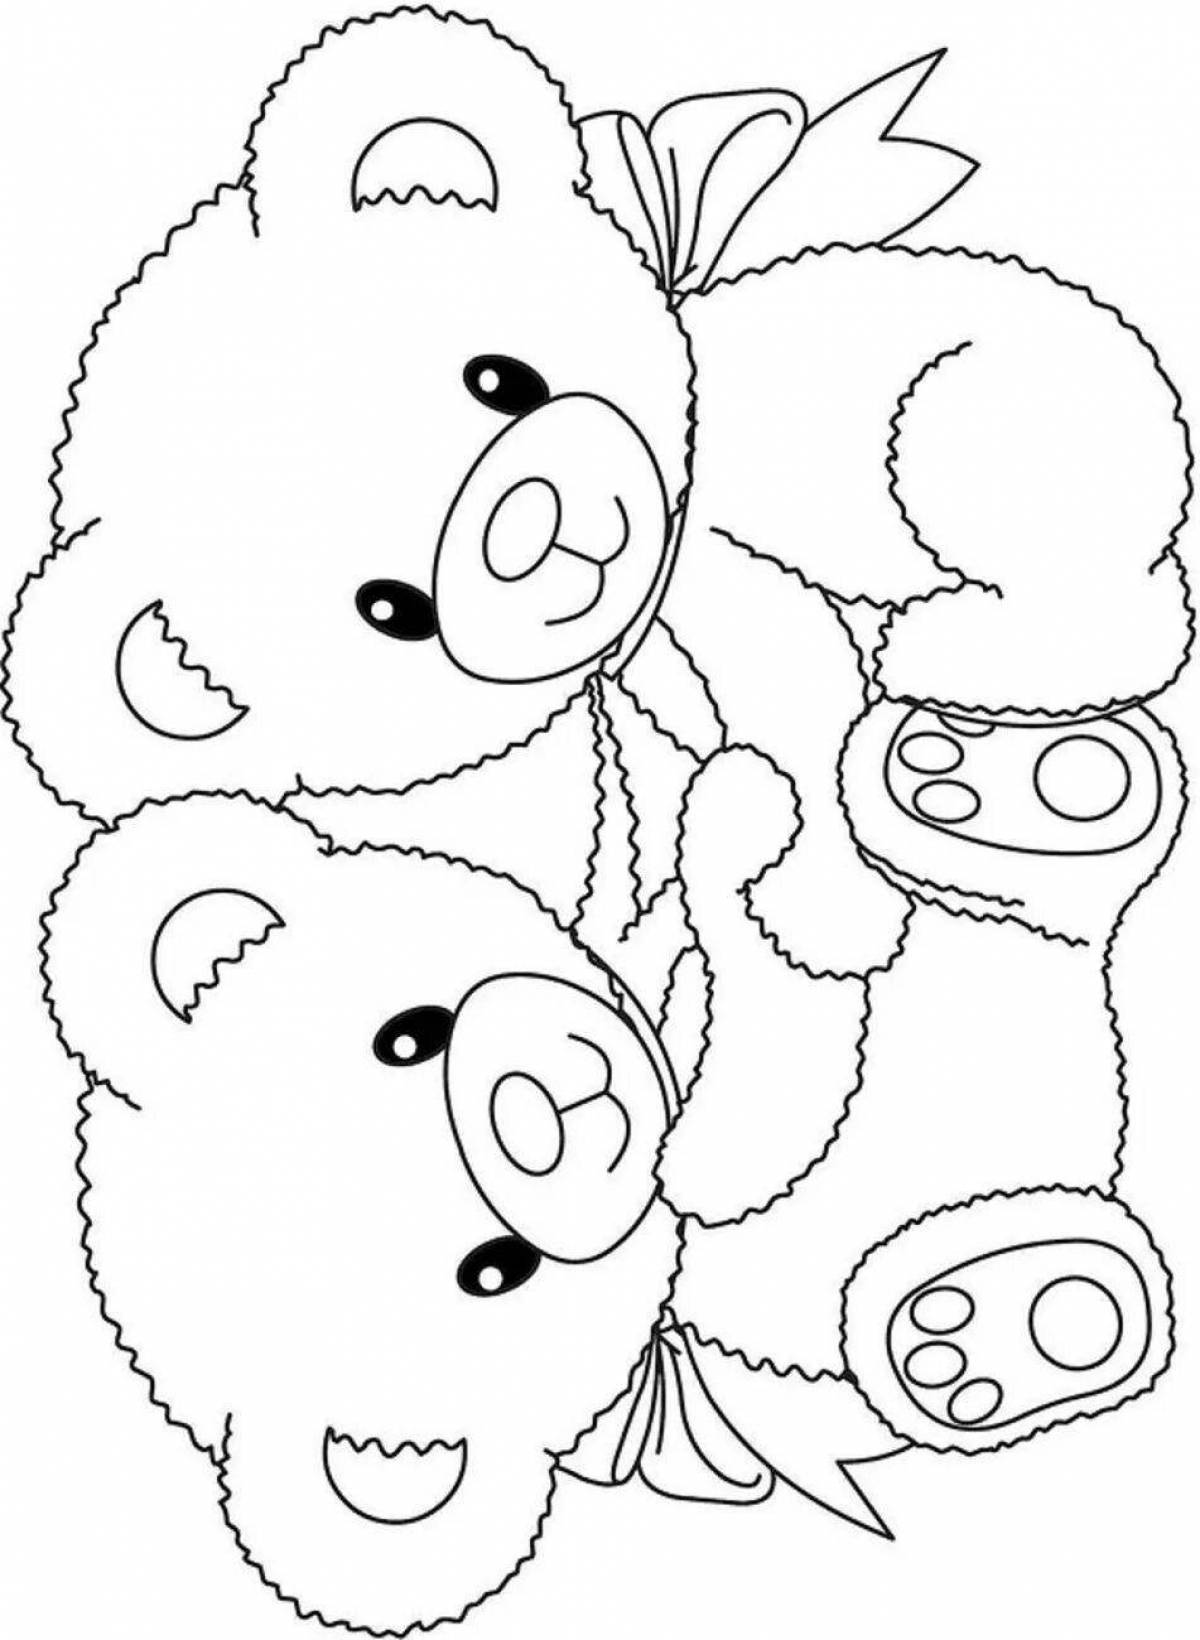 Magic teddy bear coloring book for kids